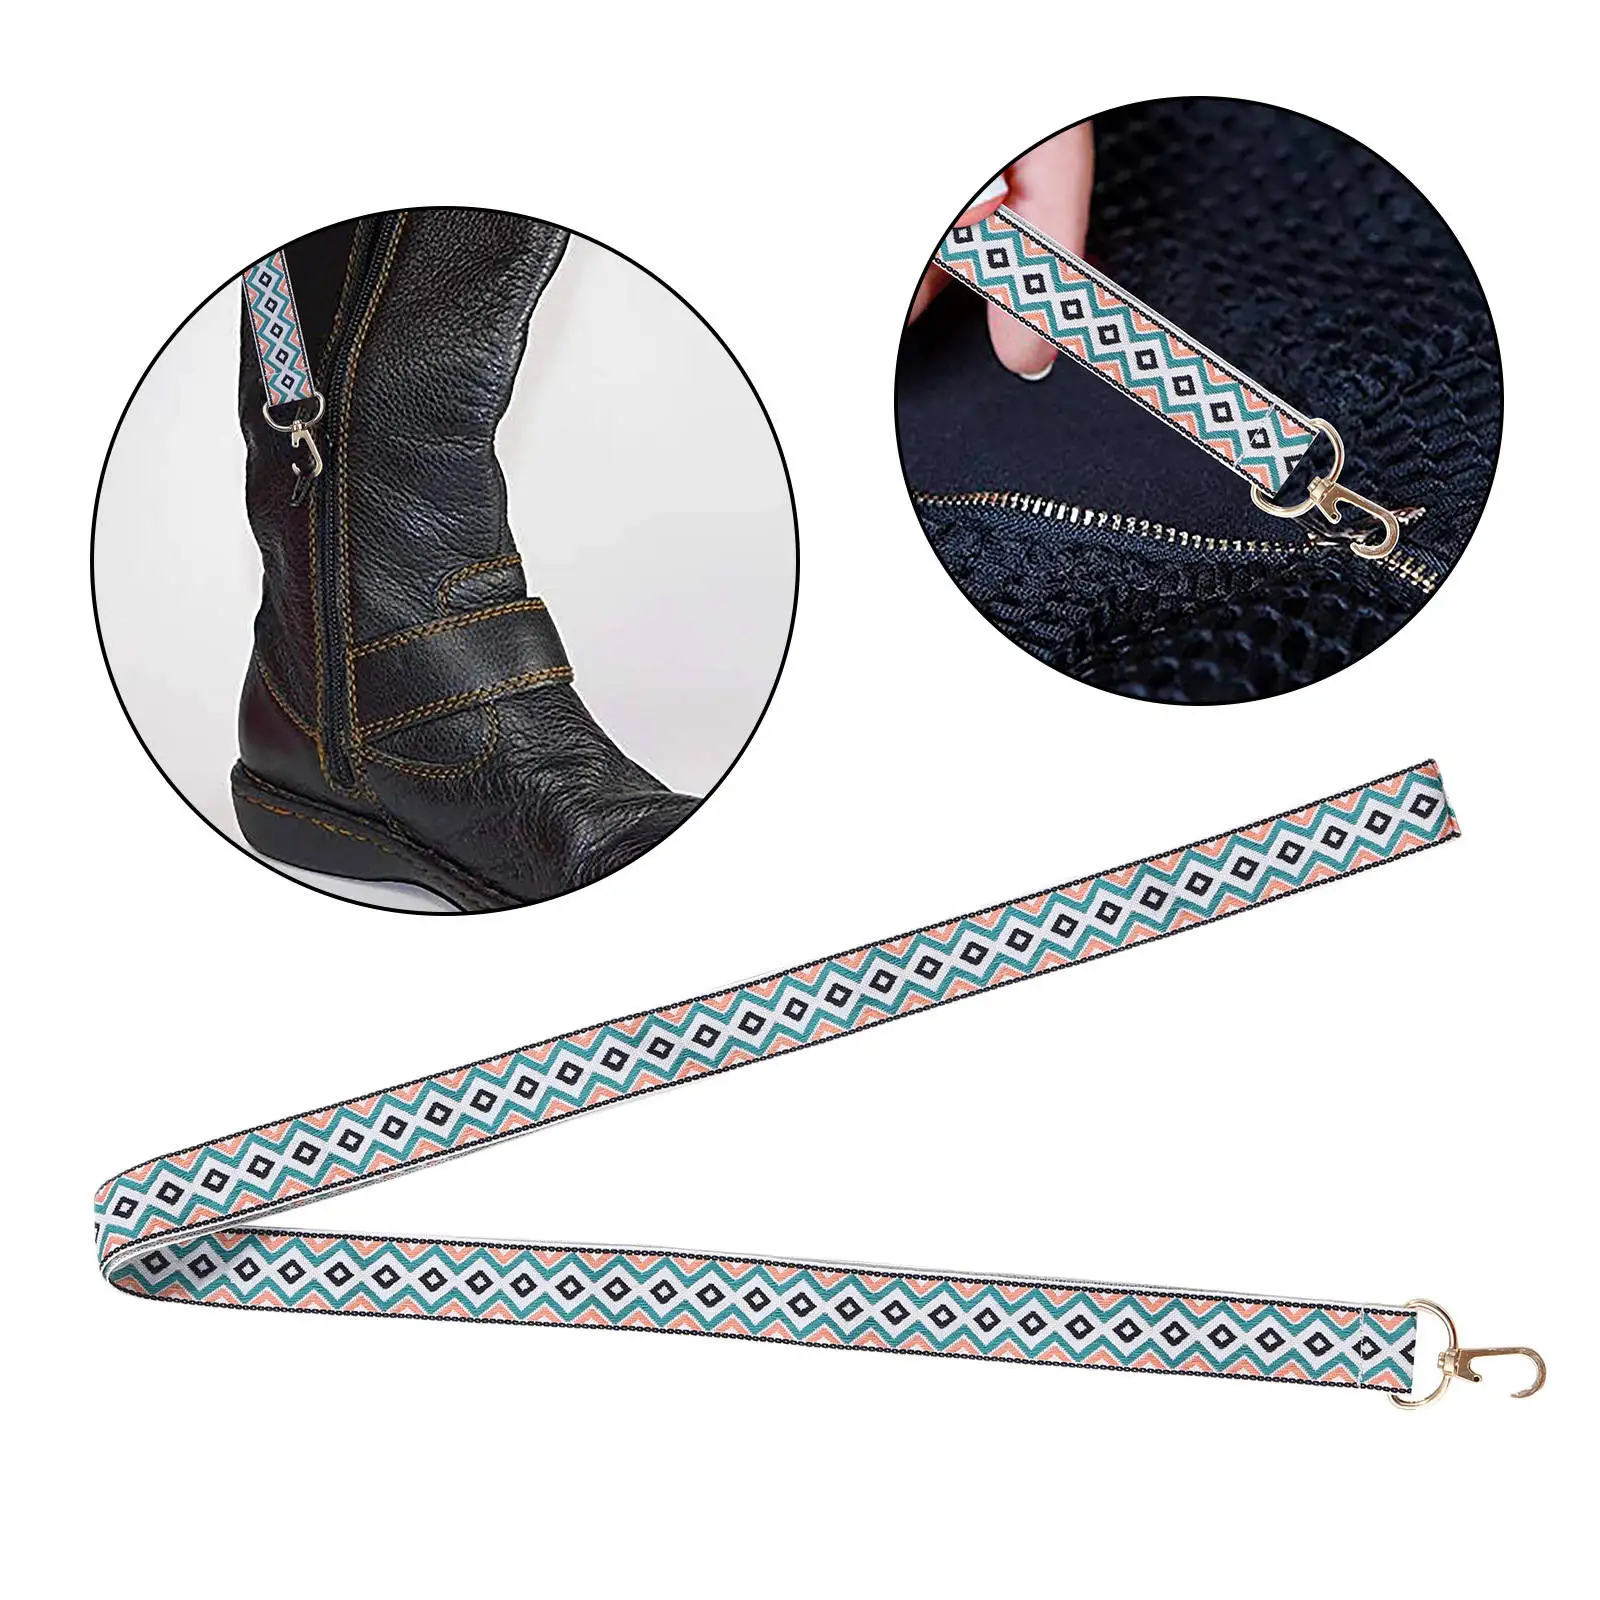 Portable Boots Dress Zipper Puller Helper Zip Up Down Cords Pull Assistant Easy Zip Aid by yourself